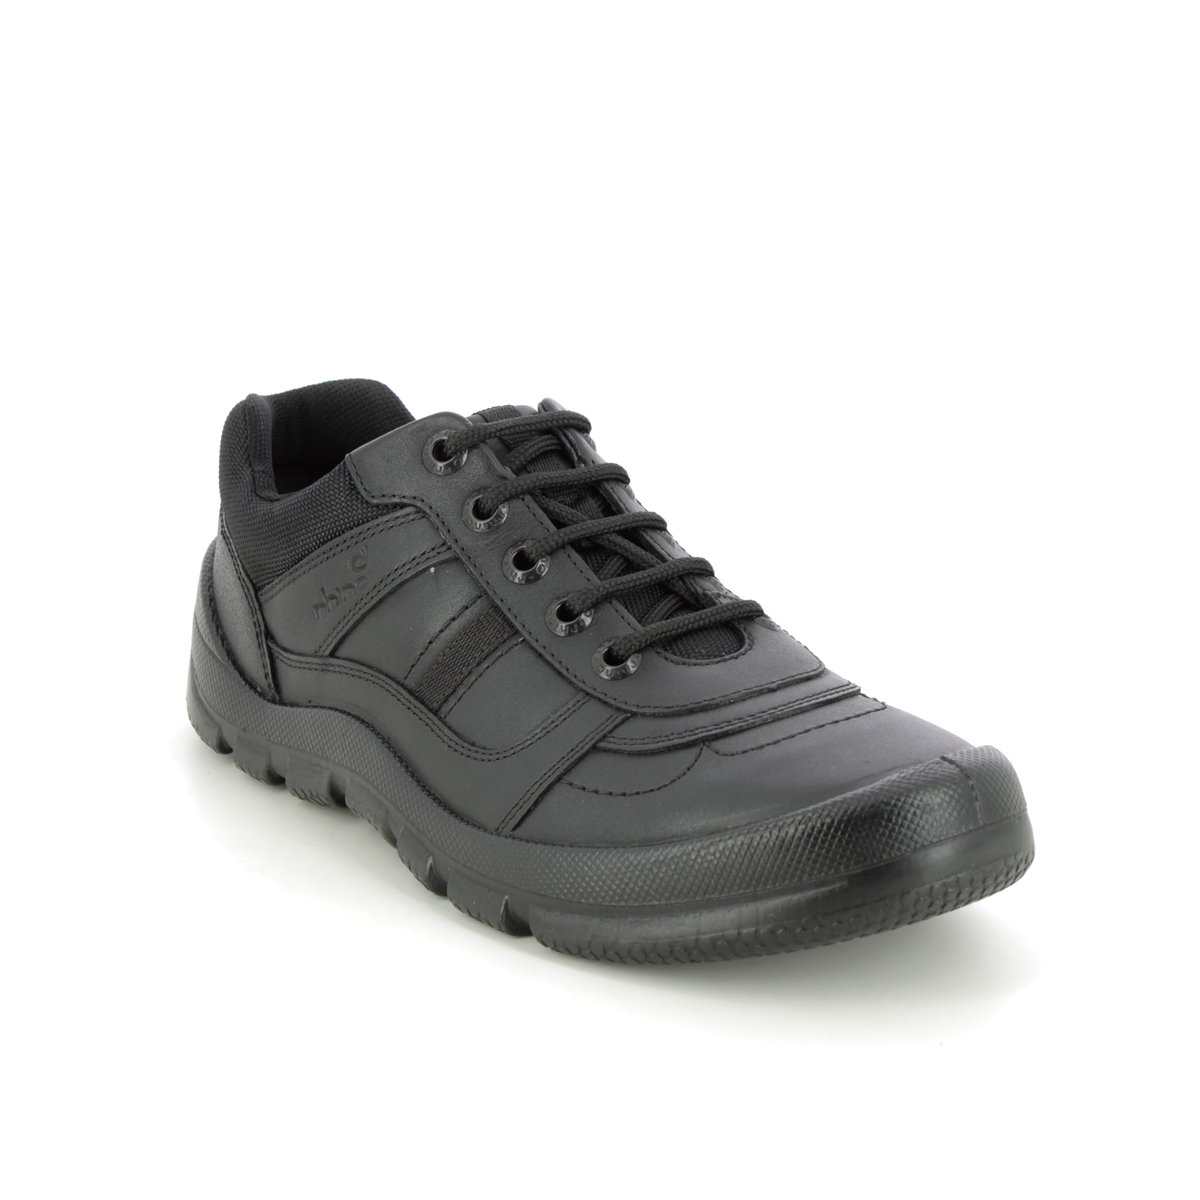 Start Rite - Rhino Warrior Lace In Black Leather 8238-76F In Size 6.5 In Plain Black Leather For School Boys Shoes  In Black Leather For kids